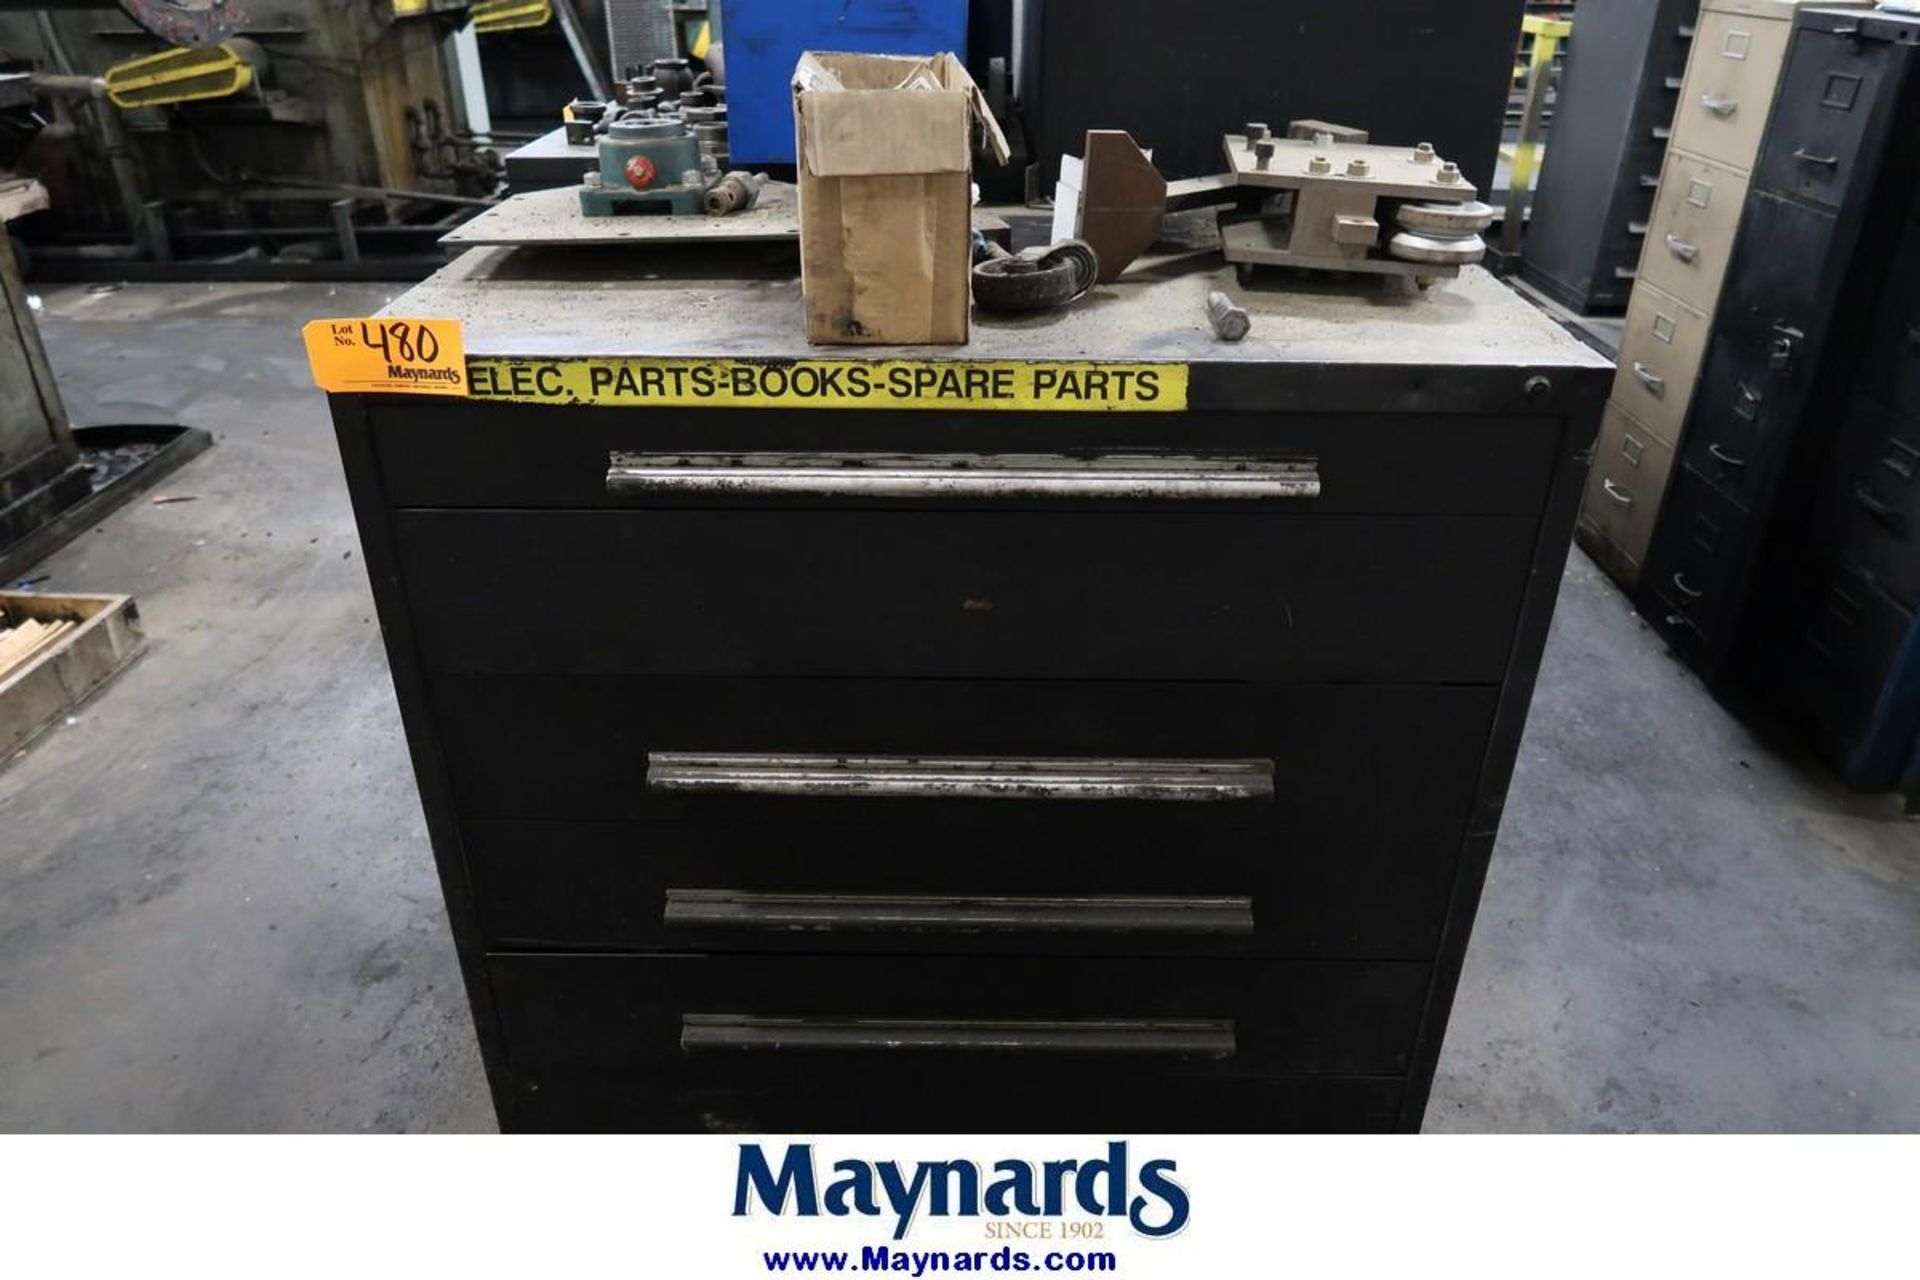 6-Drawer Heavy Duty Parts Cabinet